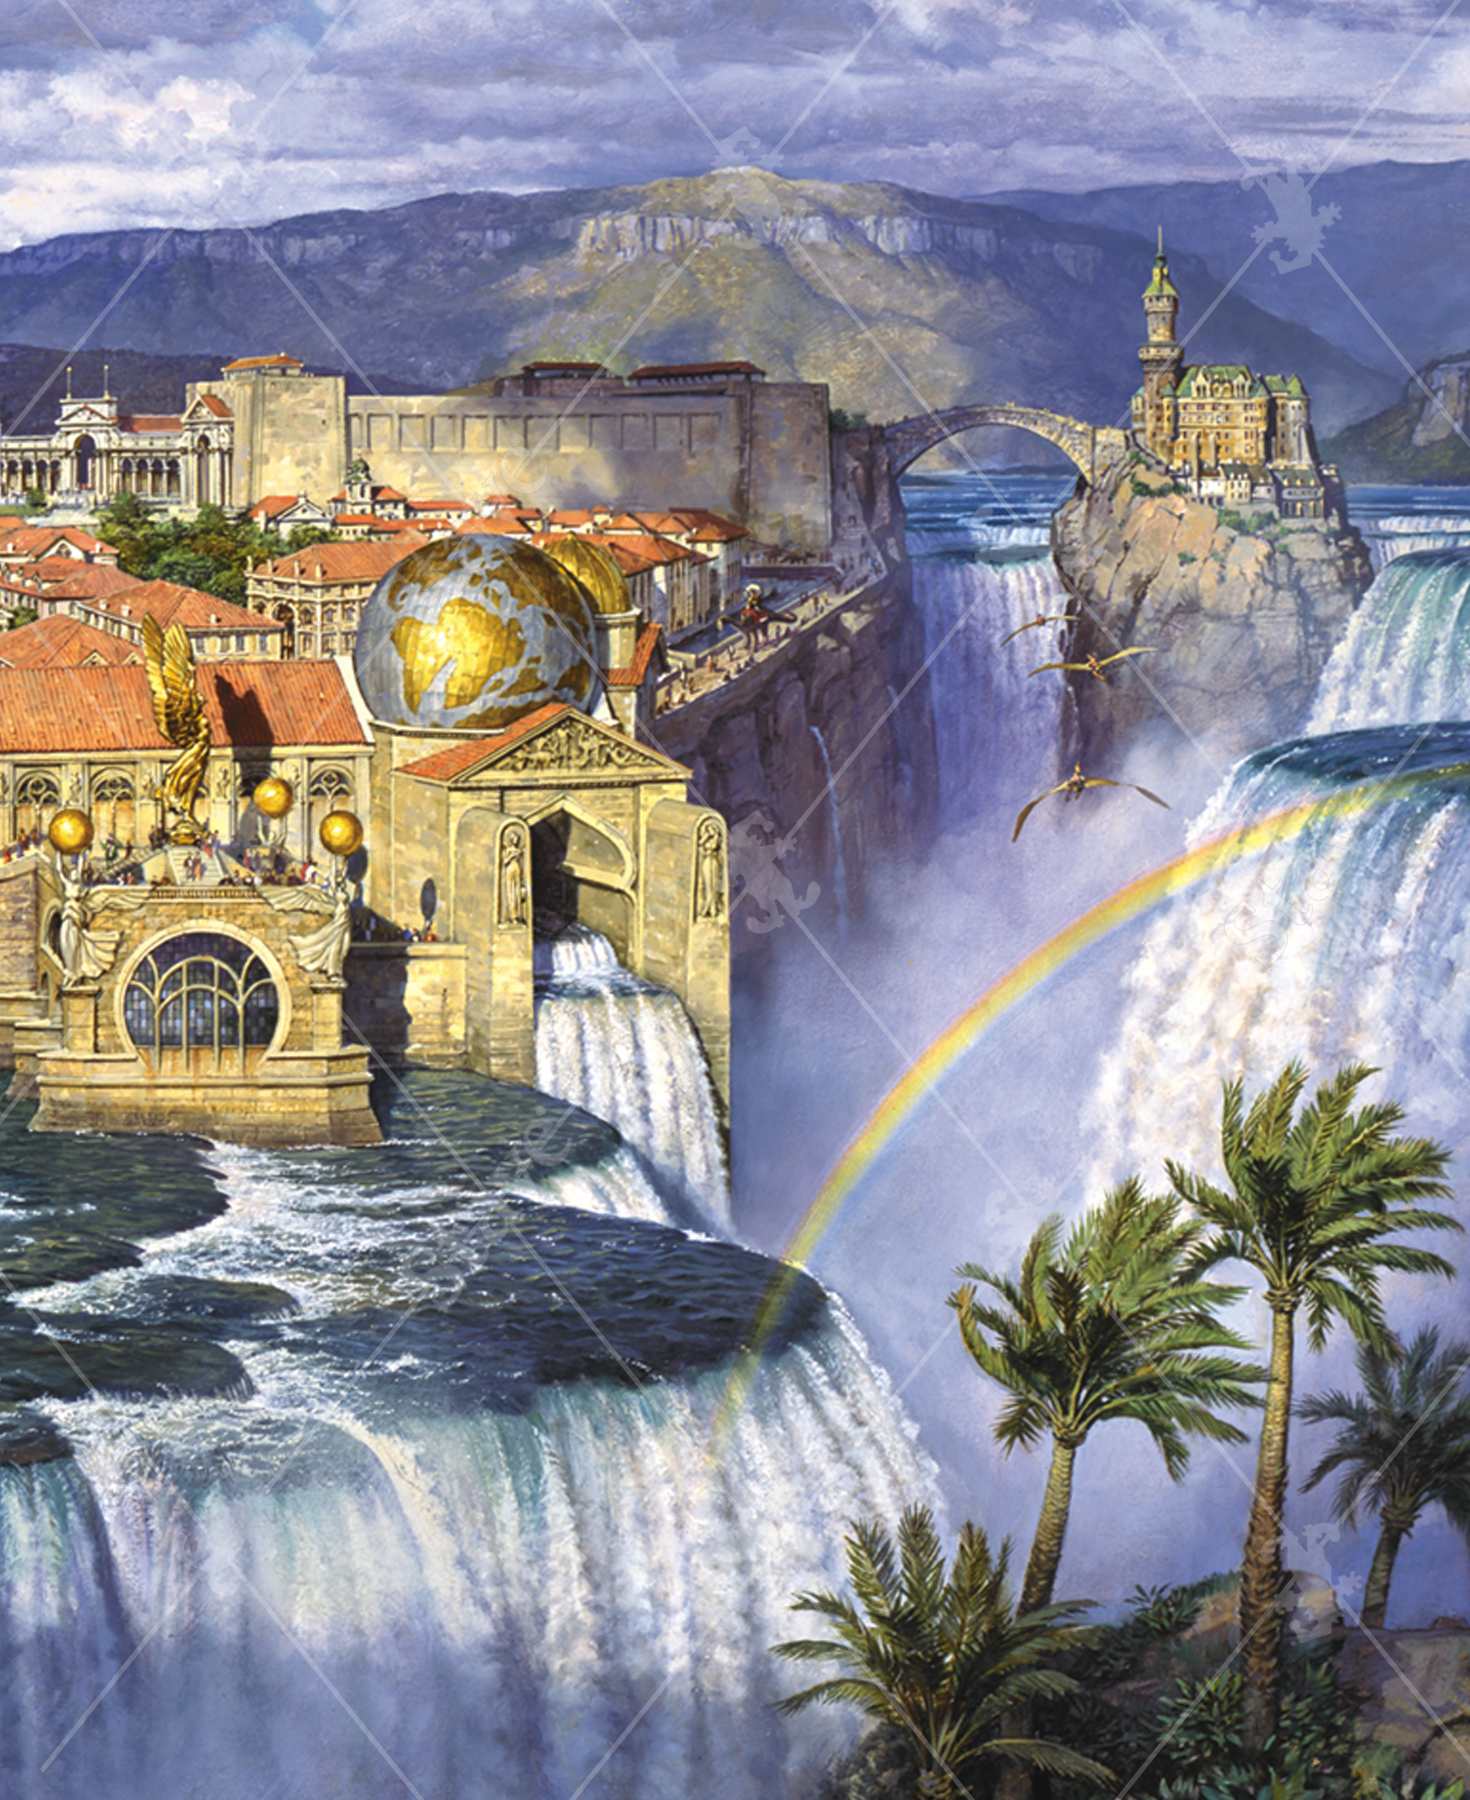 Close-up of Waterfall City wooden jigsaw puzzle transporting viewers back to prehistoric times, where a civilization is built amid rapid waterfalls with mountains in the distance. Houses, temples, and other structures are encompassed in tall stone walls. Clouds fill the sky, with the sun peaking out enough to form a rainbow that stretches across the water. From each side of the city, pterodactyls fly above the roaring waters.